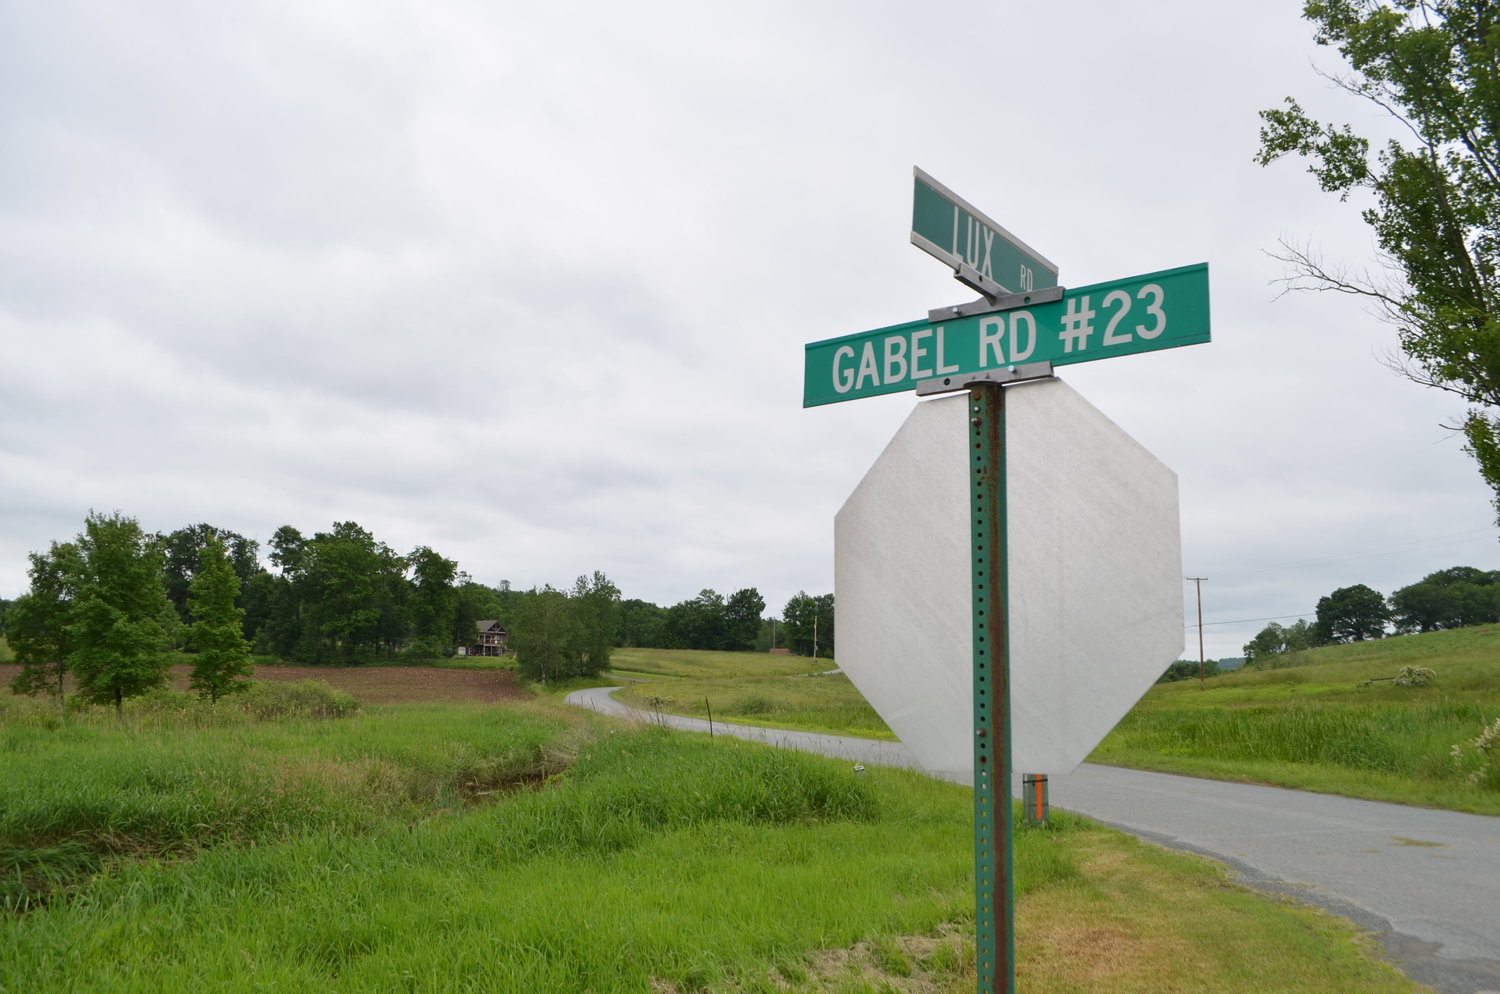 Gabel Road runs through a largely open, agricultural section of the town of Delaware.